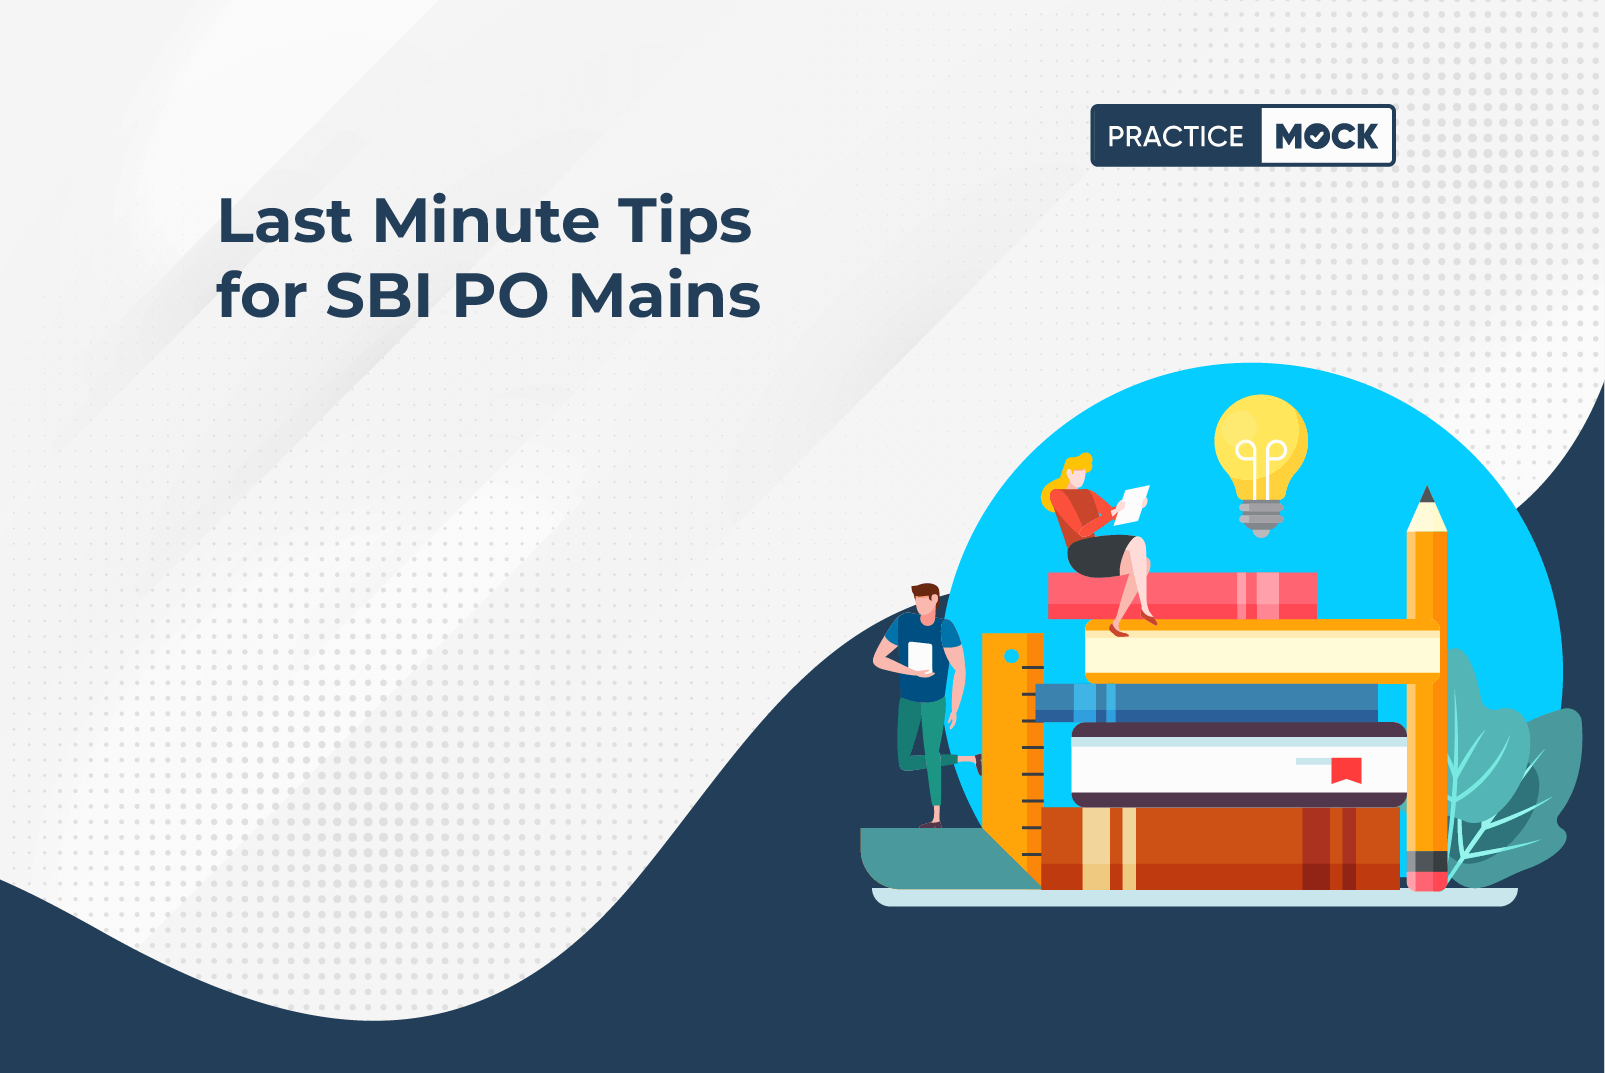 Last Minute Tips for SBI PO Mains (1)